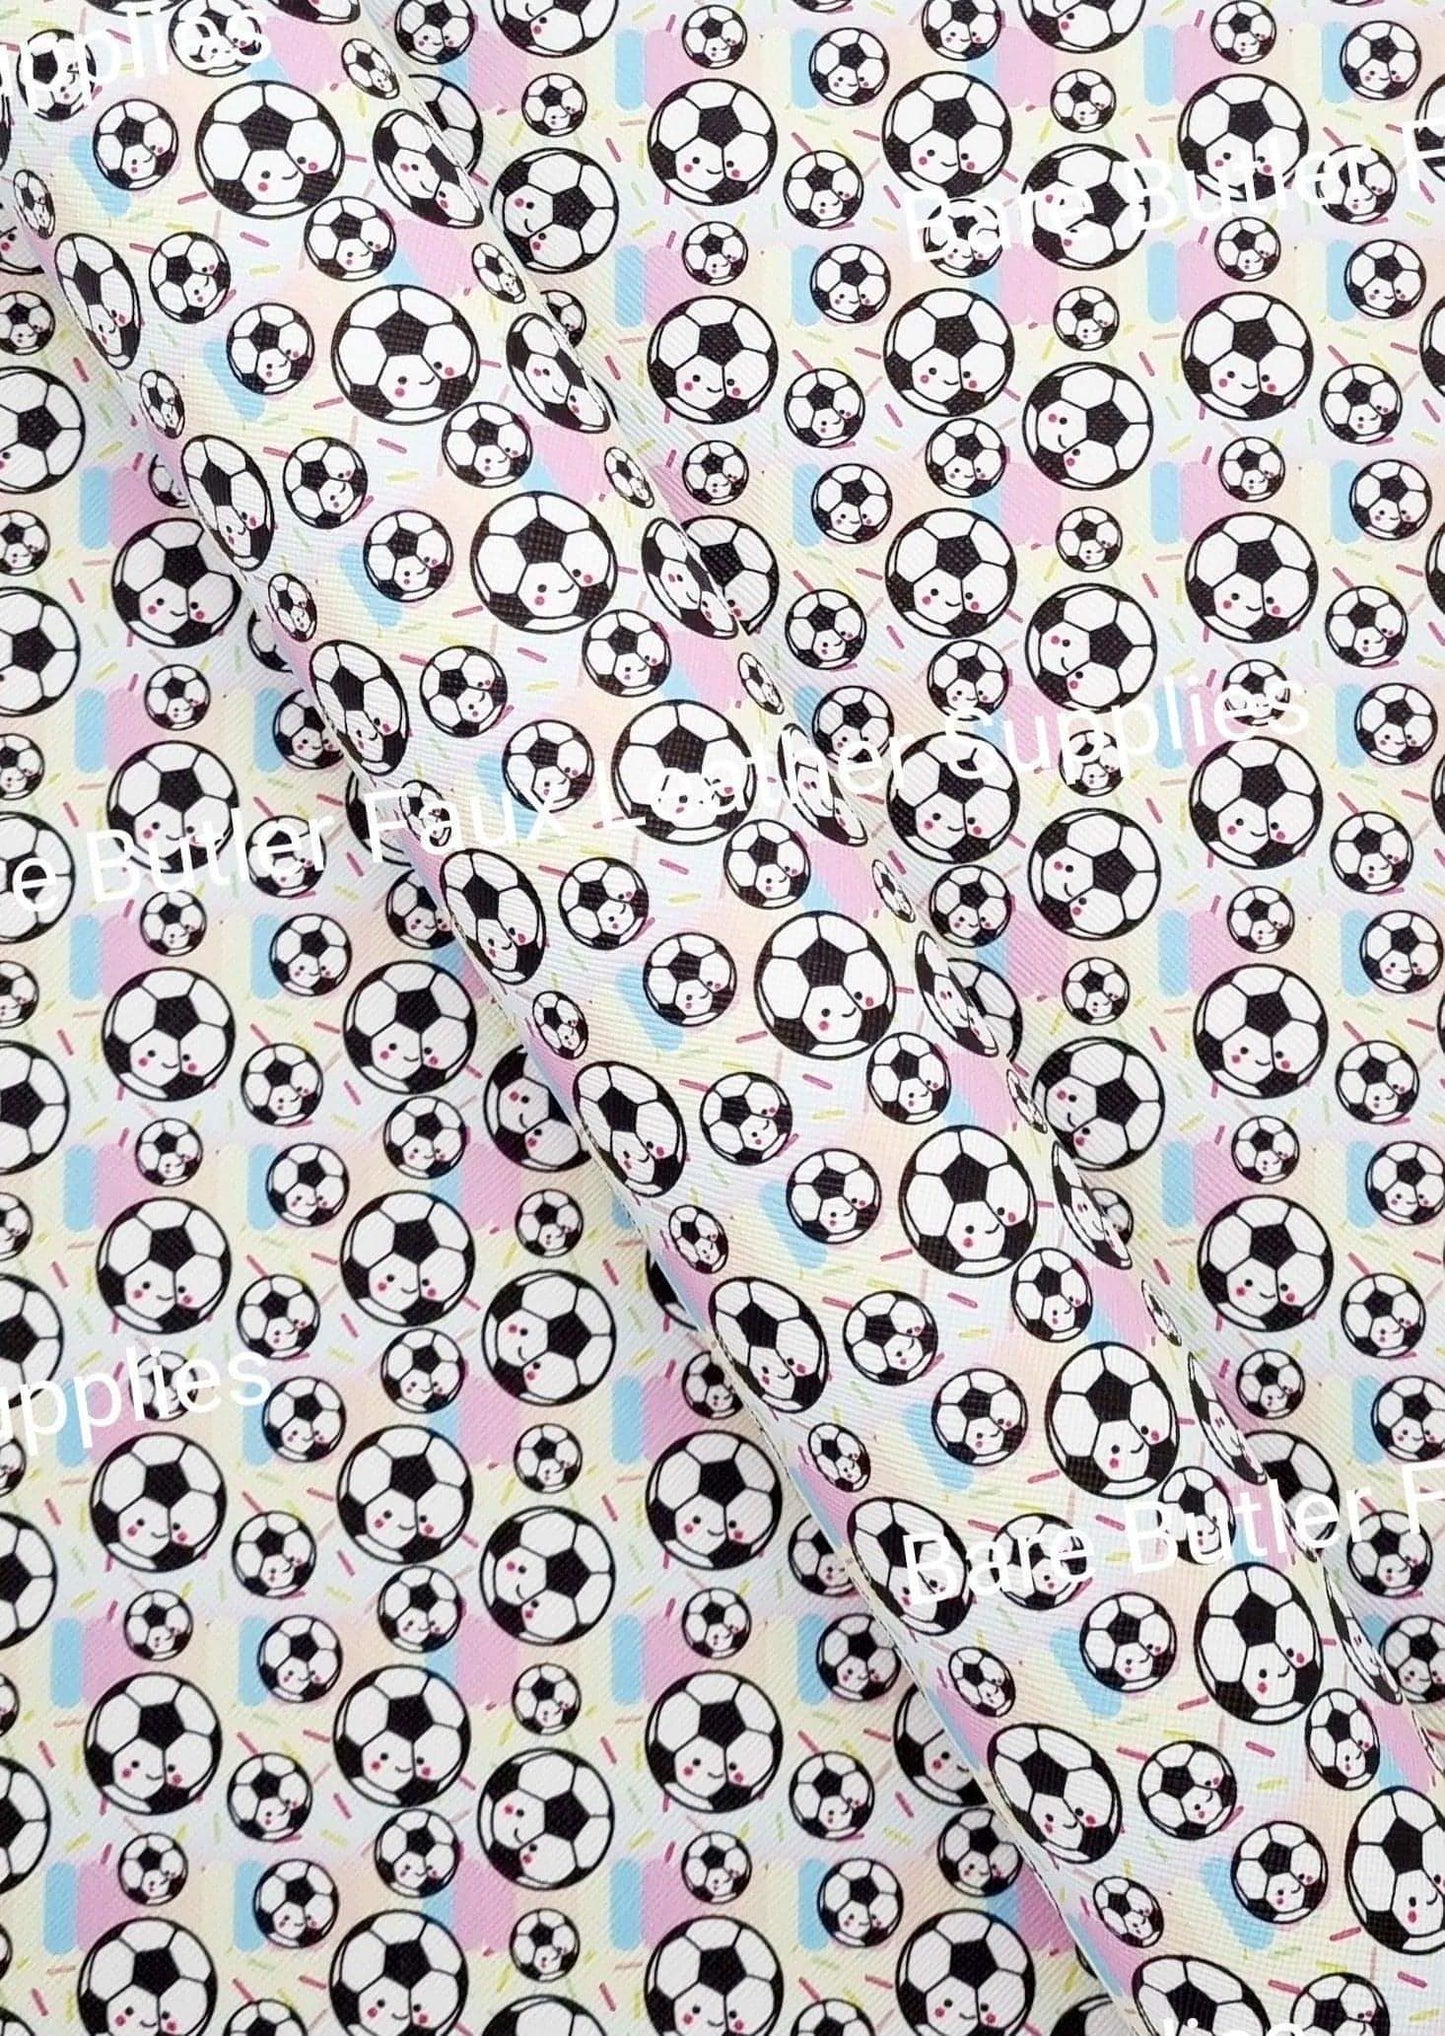 Soccer Ball Faux Leather - Faux, Faux Leather, Leather, leatherette, Litchi, Sport - Bare Butler Faux Leather Supplies 